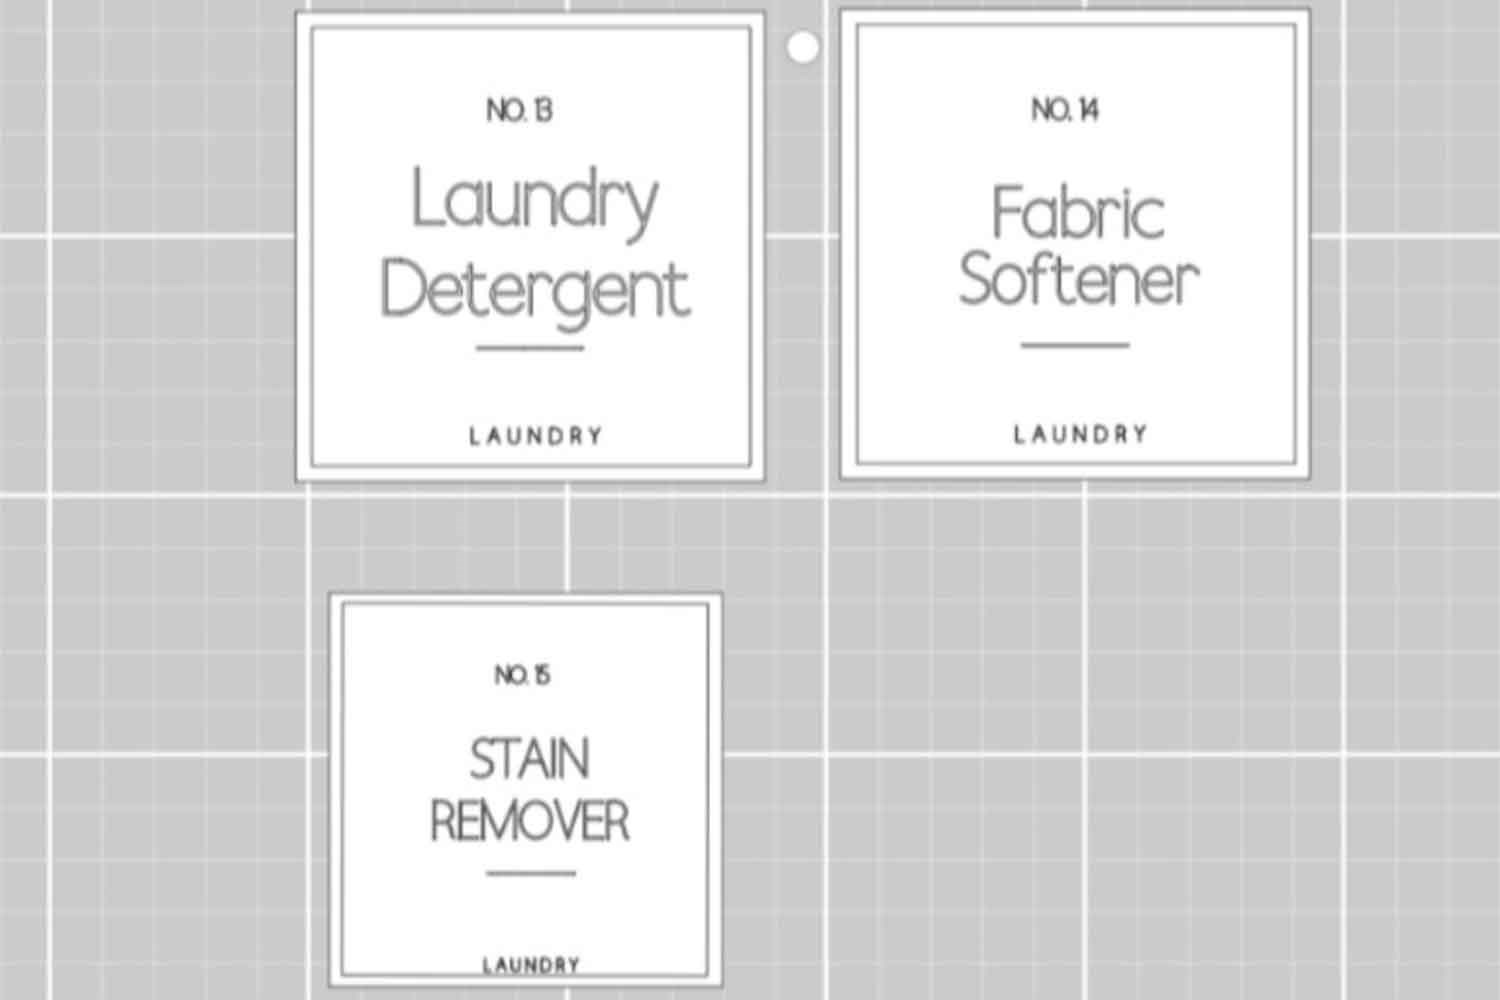 diy-laundry-labels-with-cricut-organise-your-laundry-products-better